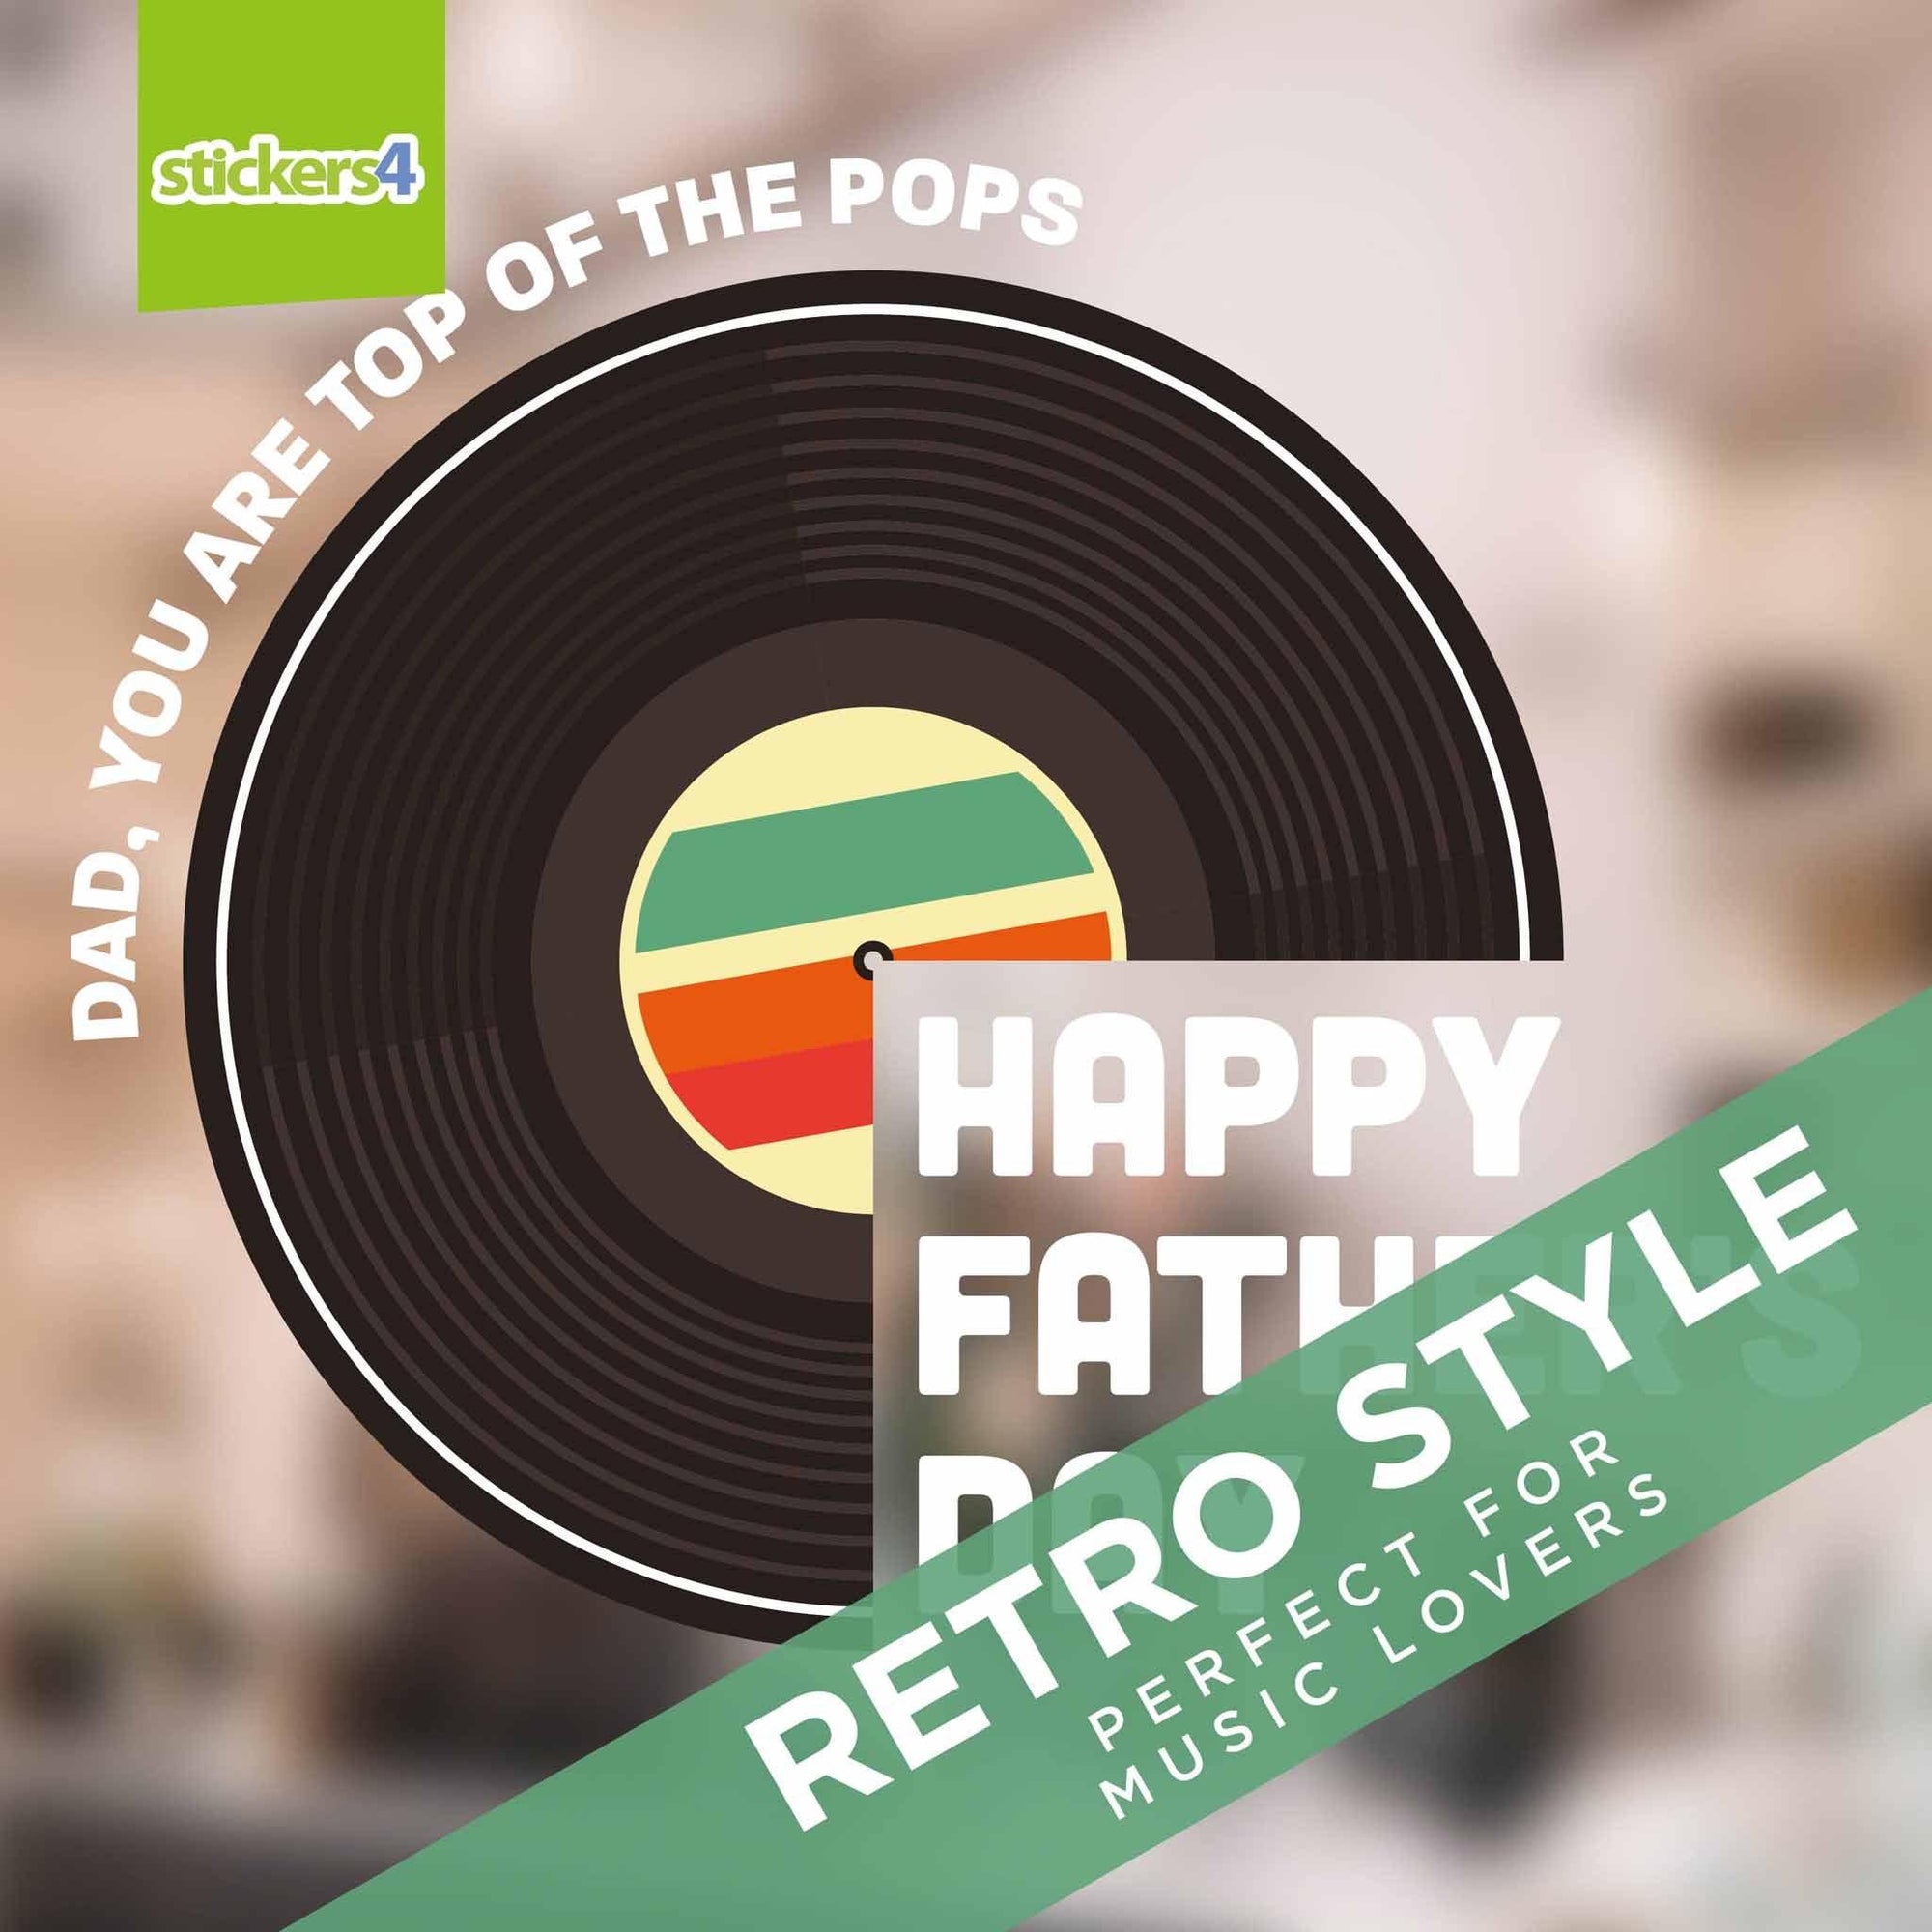 Top of the Pops Vinyl Window Sticker Father's Day Window Display